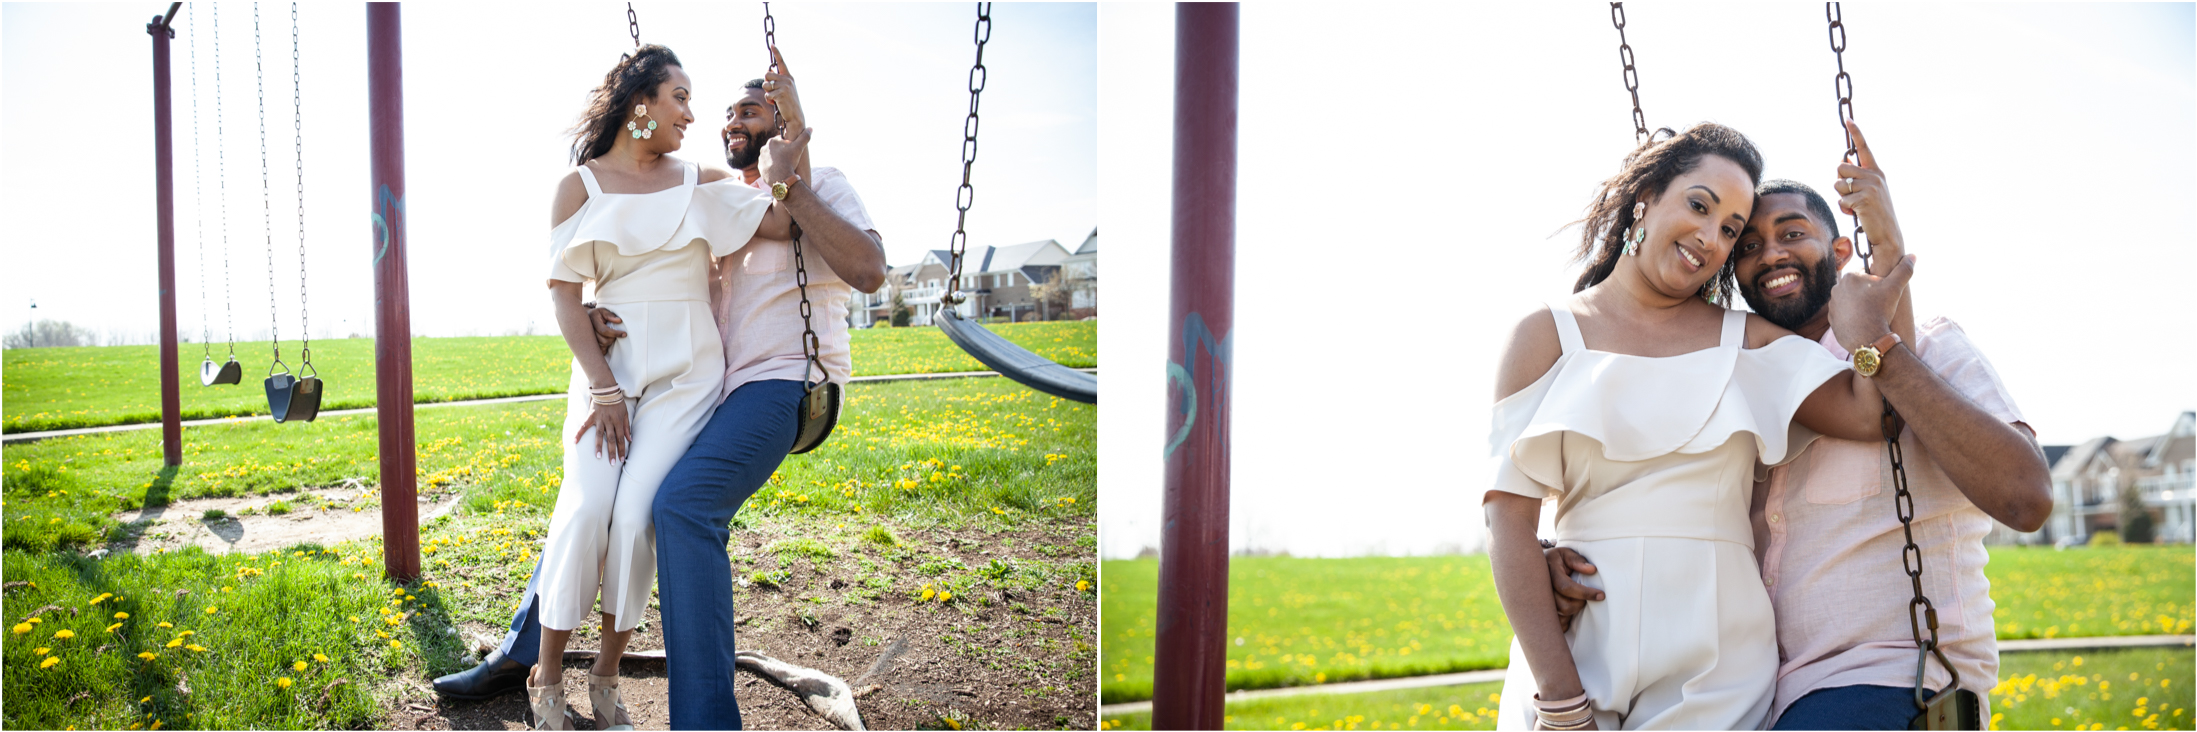 Engagement photo of a couple on the playground swing set